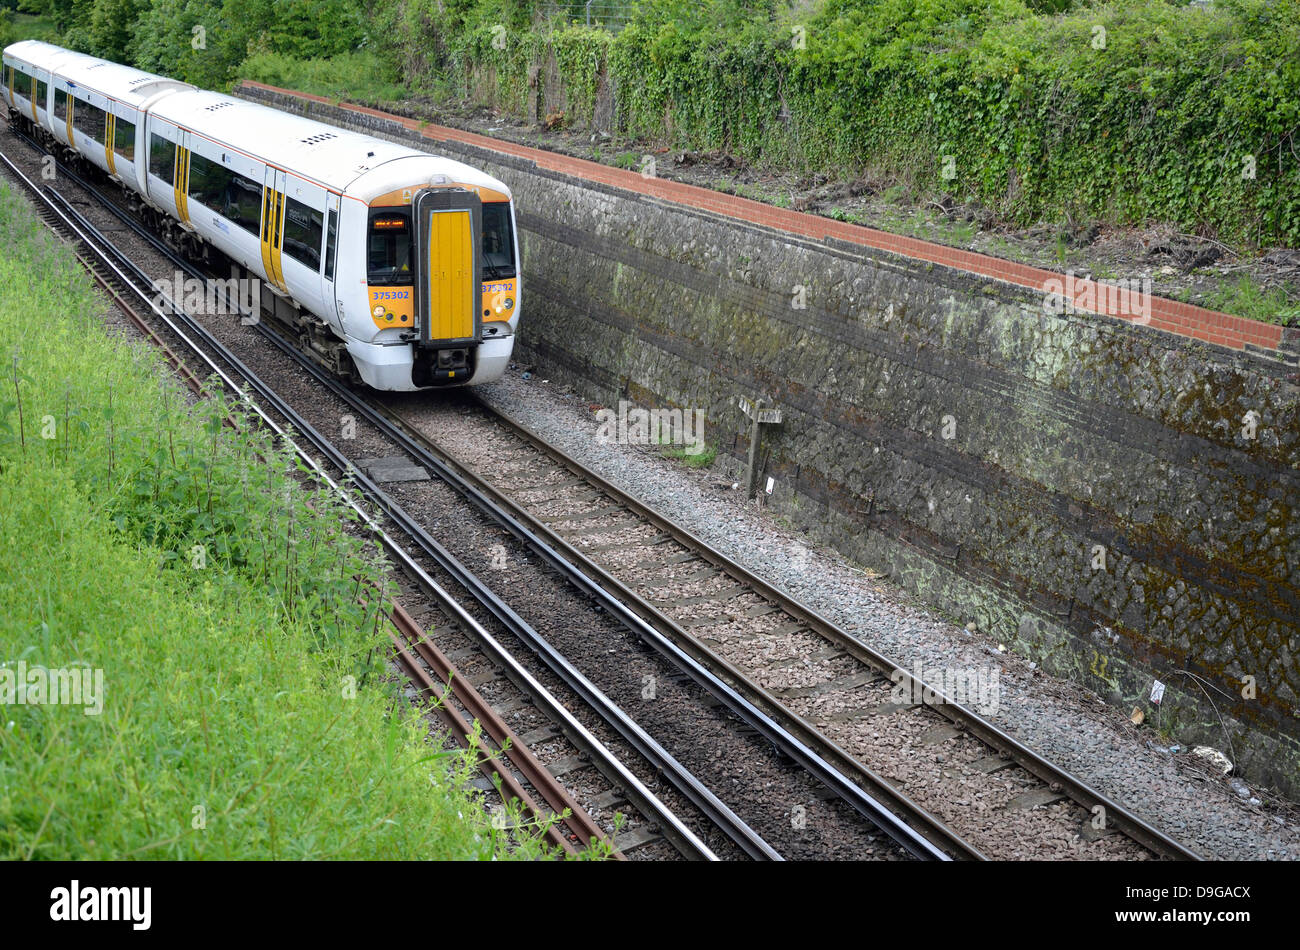 Maidstone, Kent, England. South Eastern train (class 357 'Electrostar') passing through cutting near the town centre Stock Photo